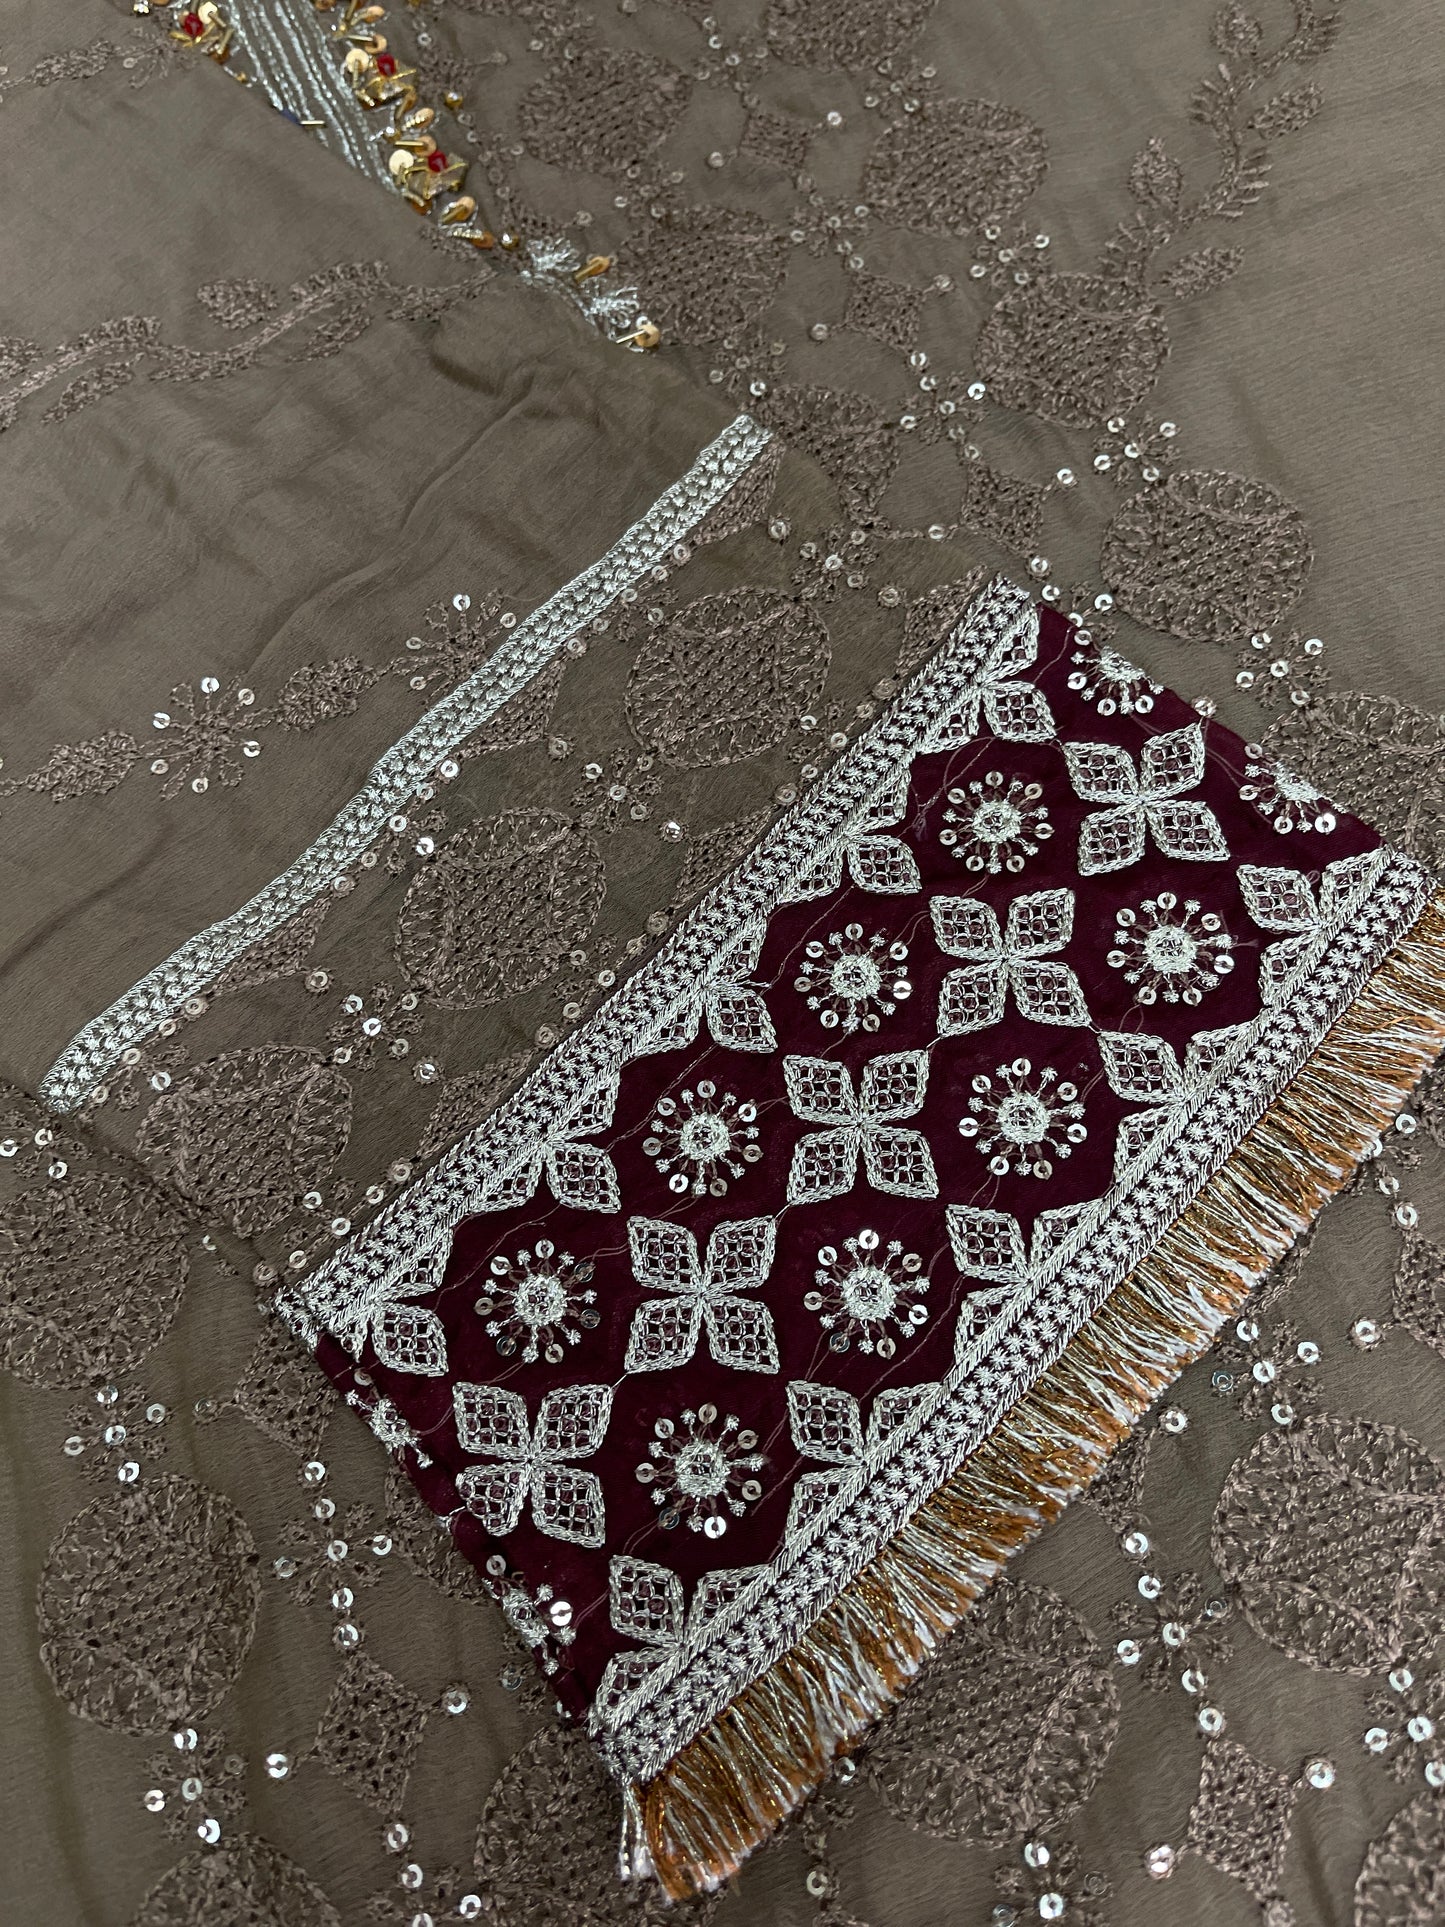 3PC Fancy Brown Outfit with Embroidery